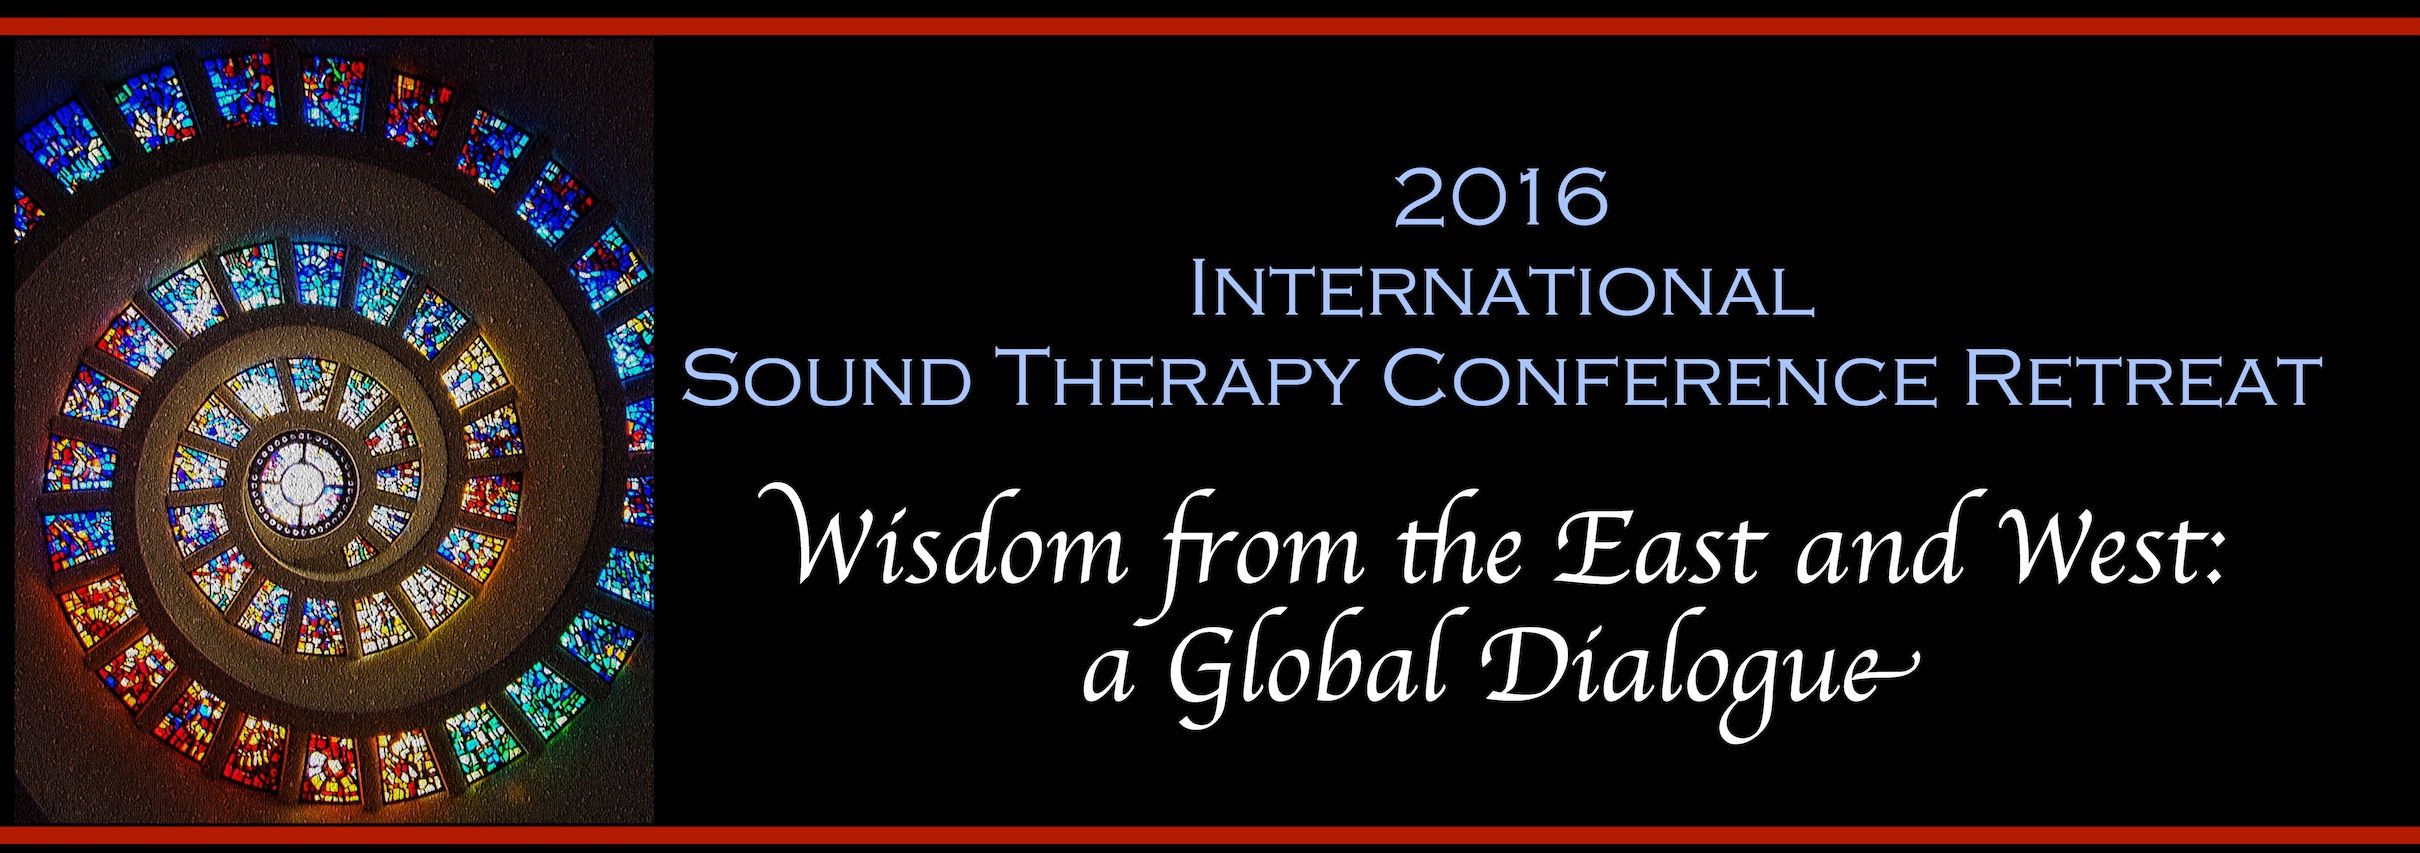 International Sound Therapy Conference Retreat